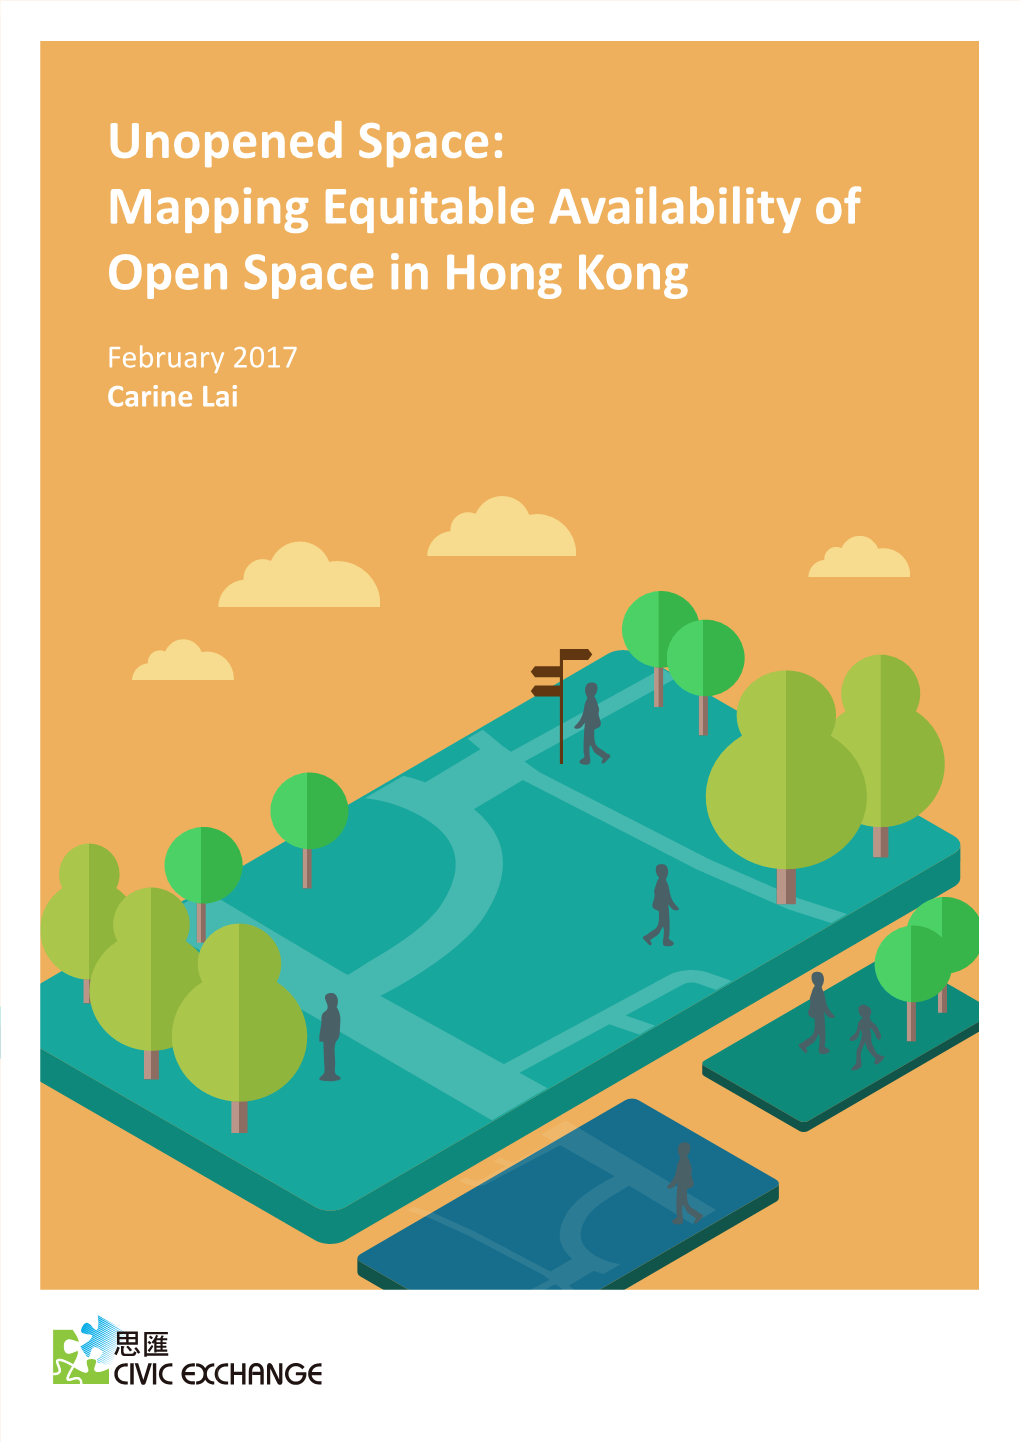 Mapping Equitable Availability of Open Space in Hong Kong